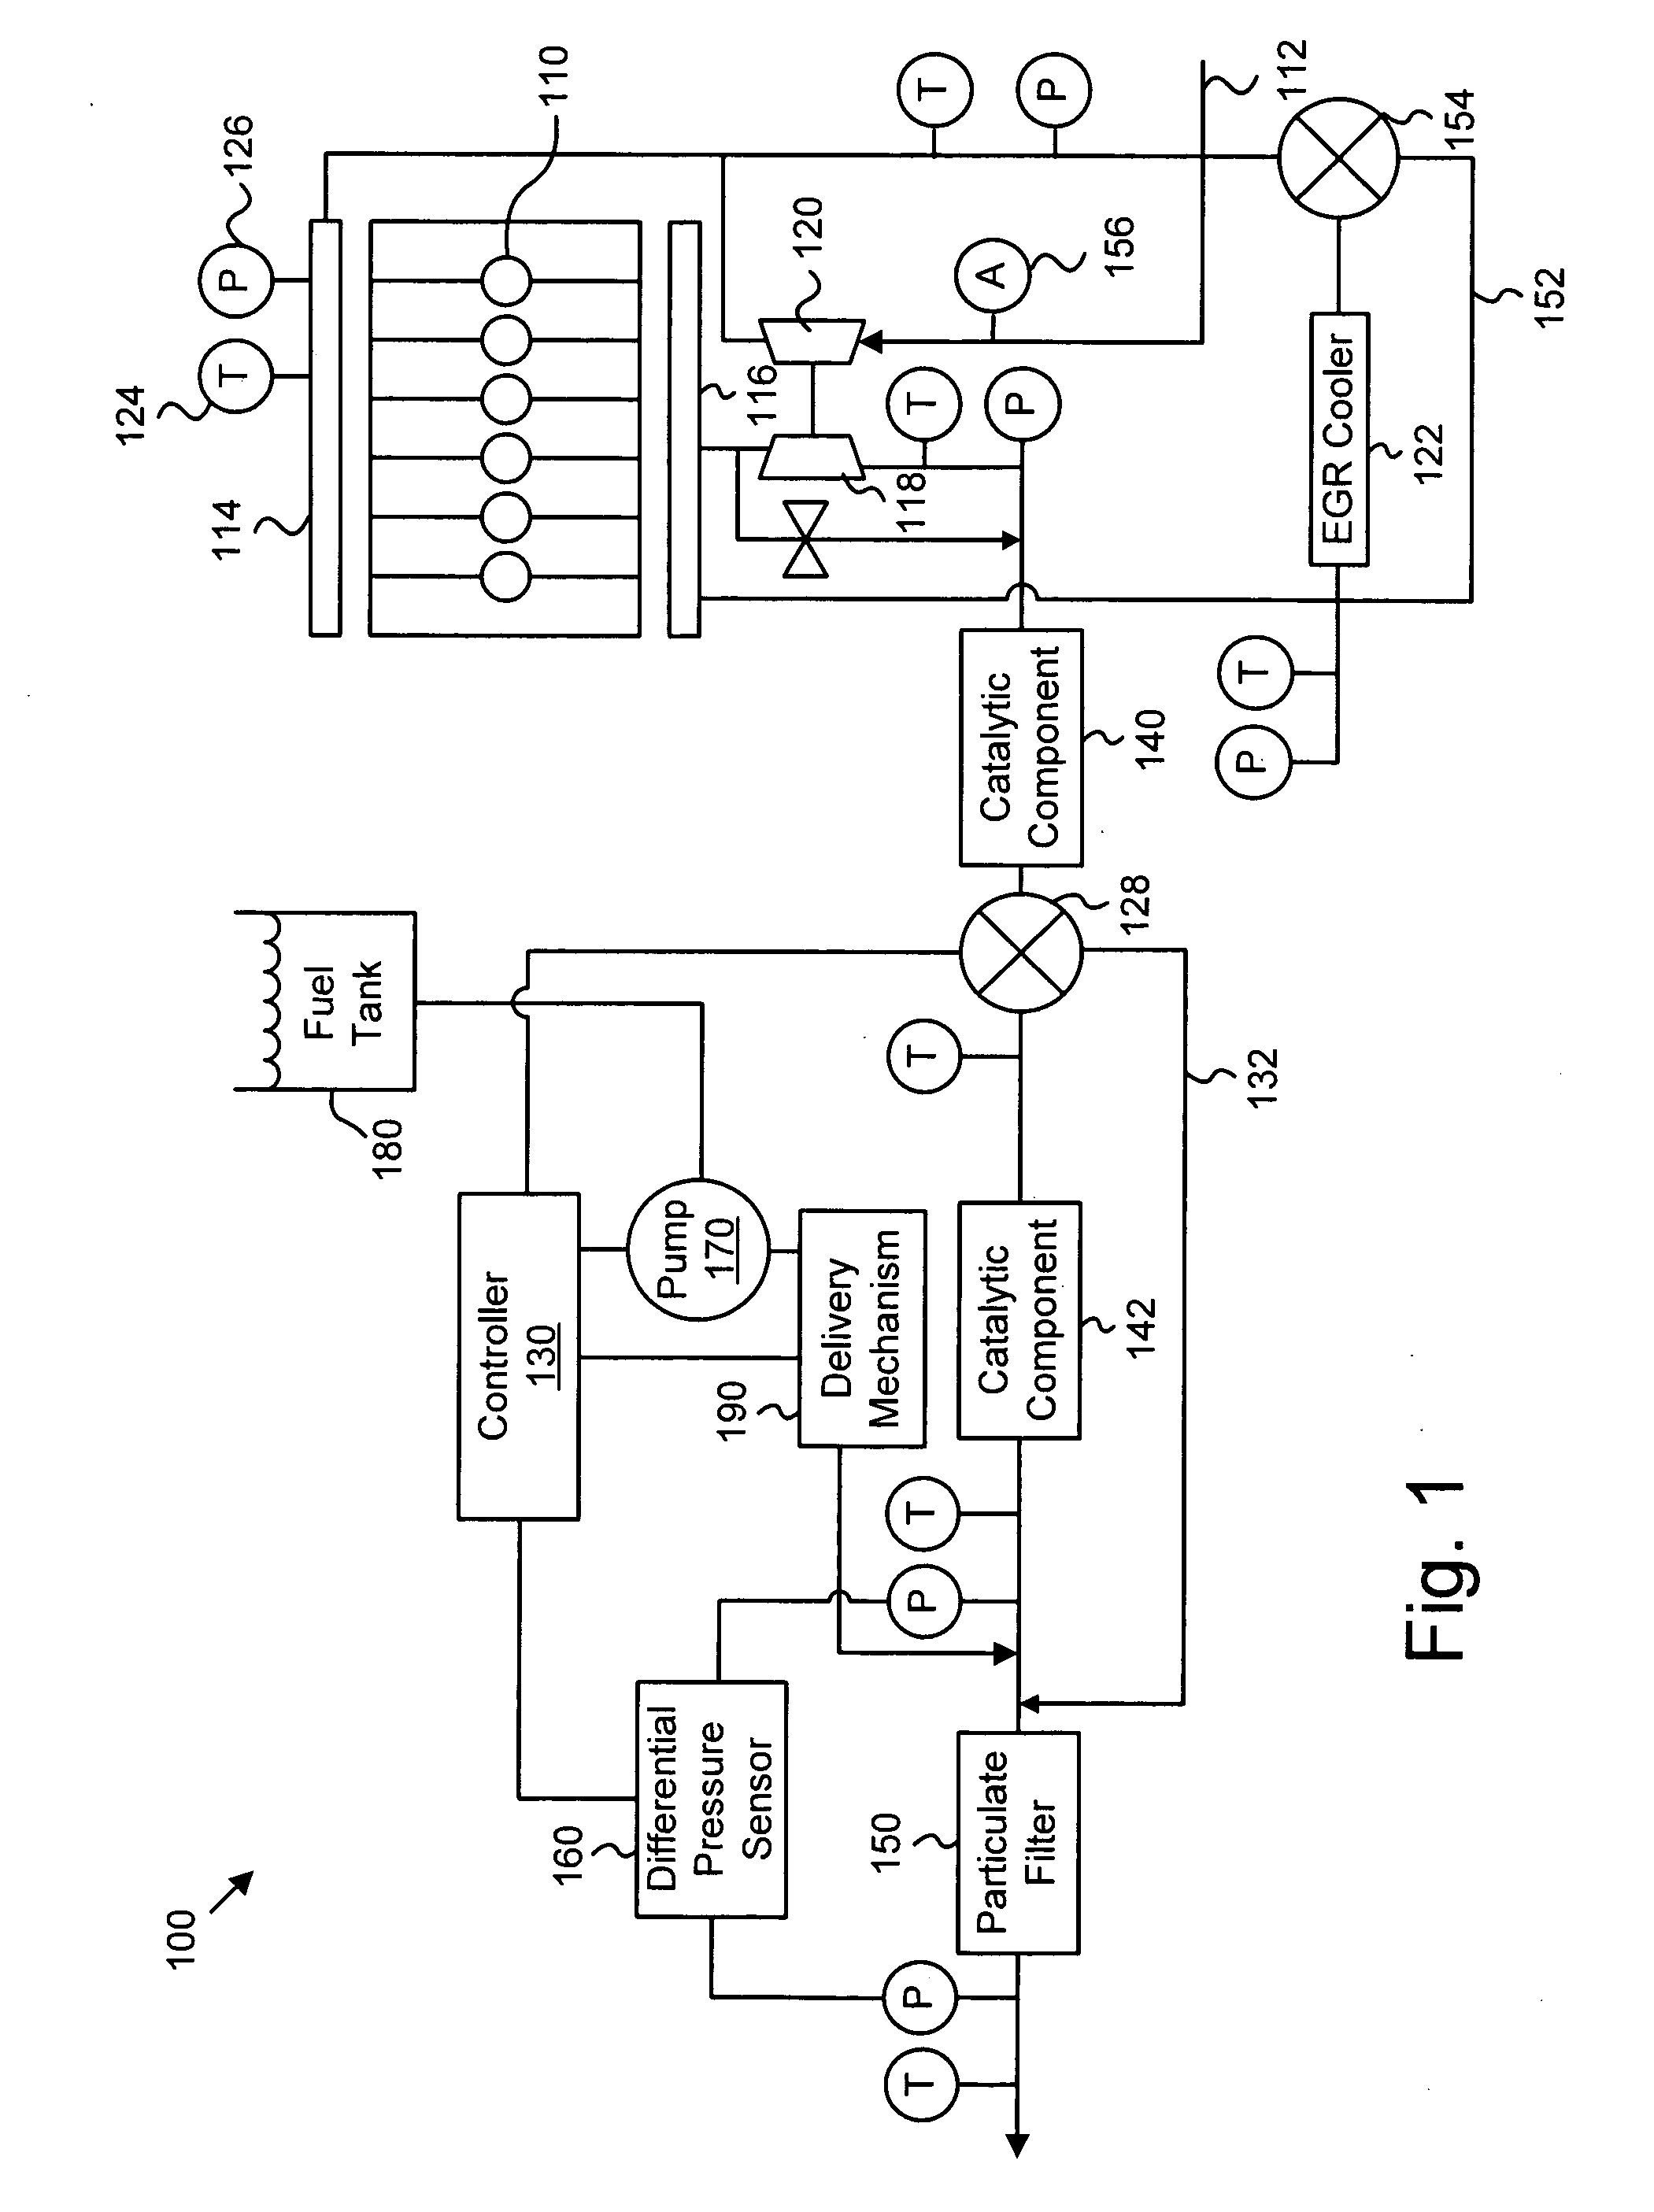 Apparatus, system, and method for estimating ash accumulation